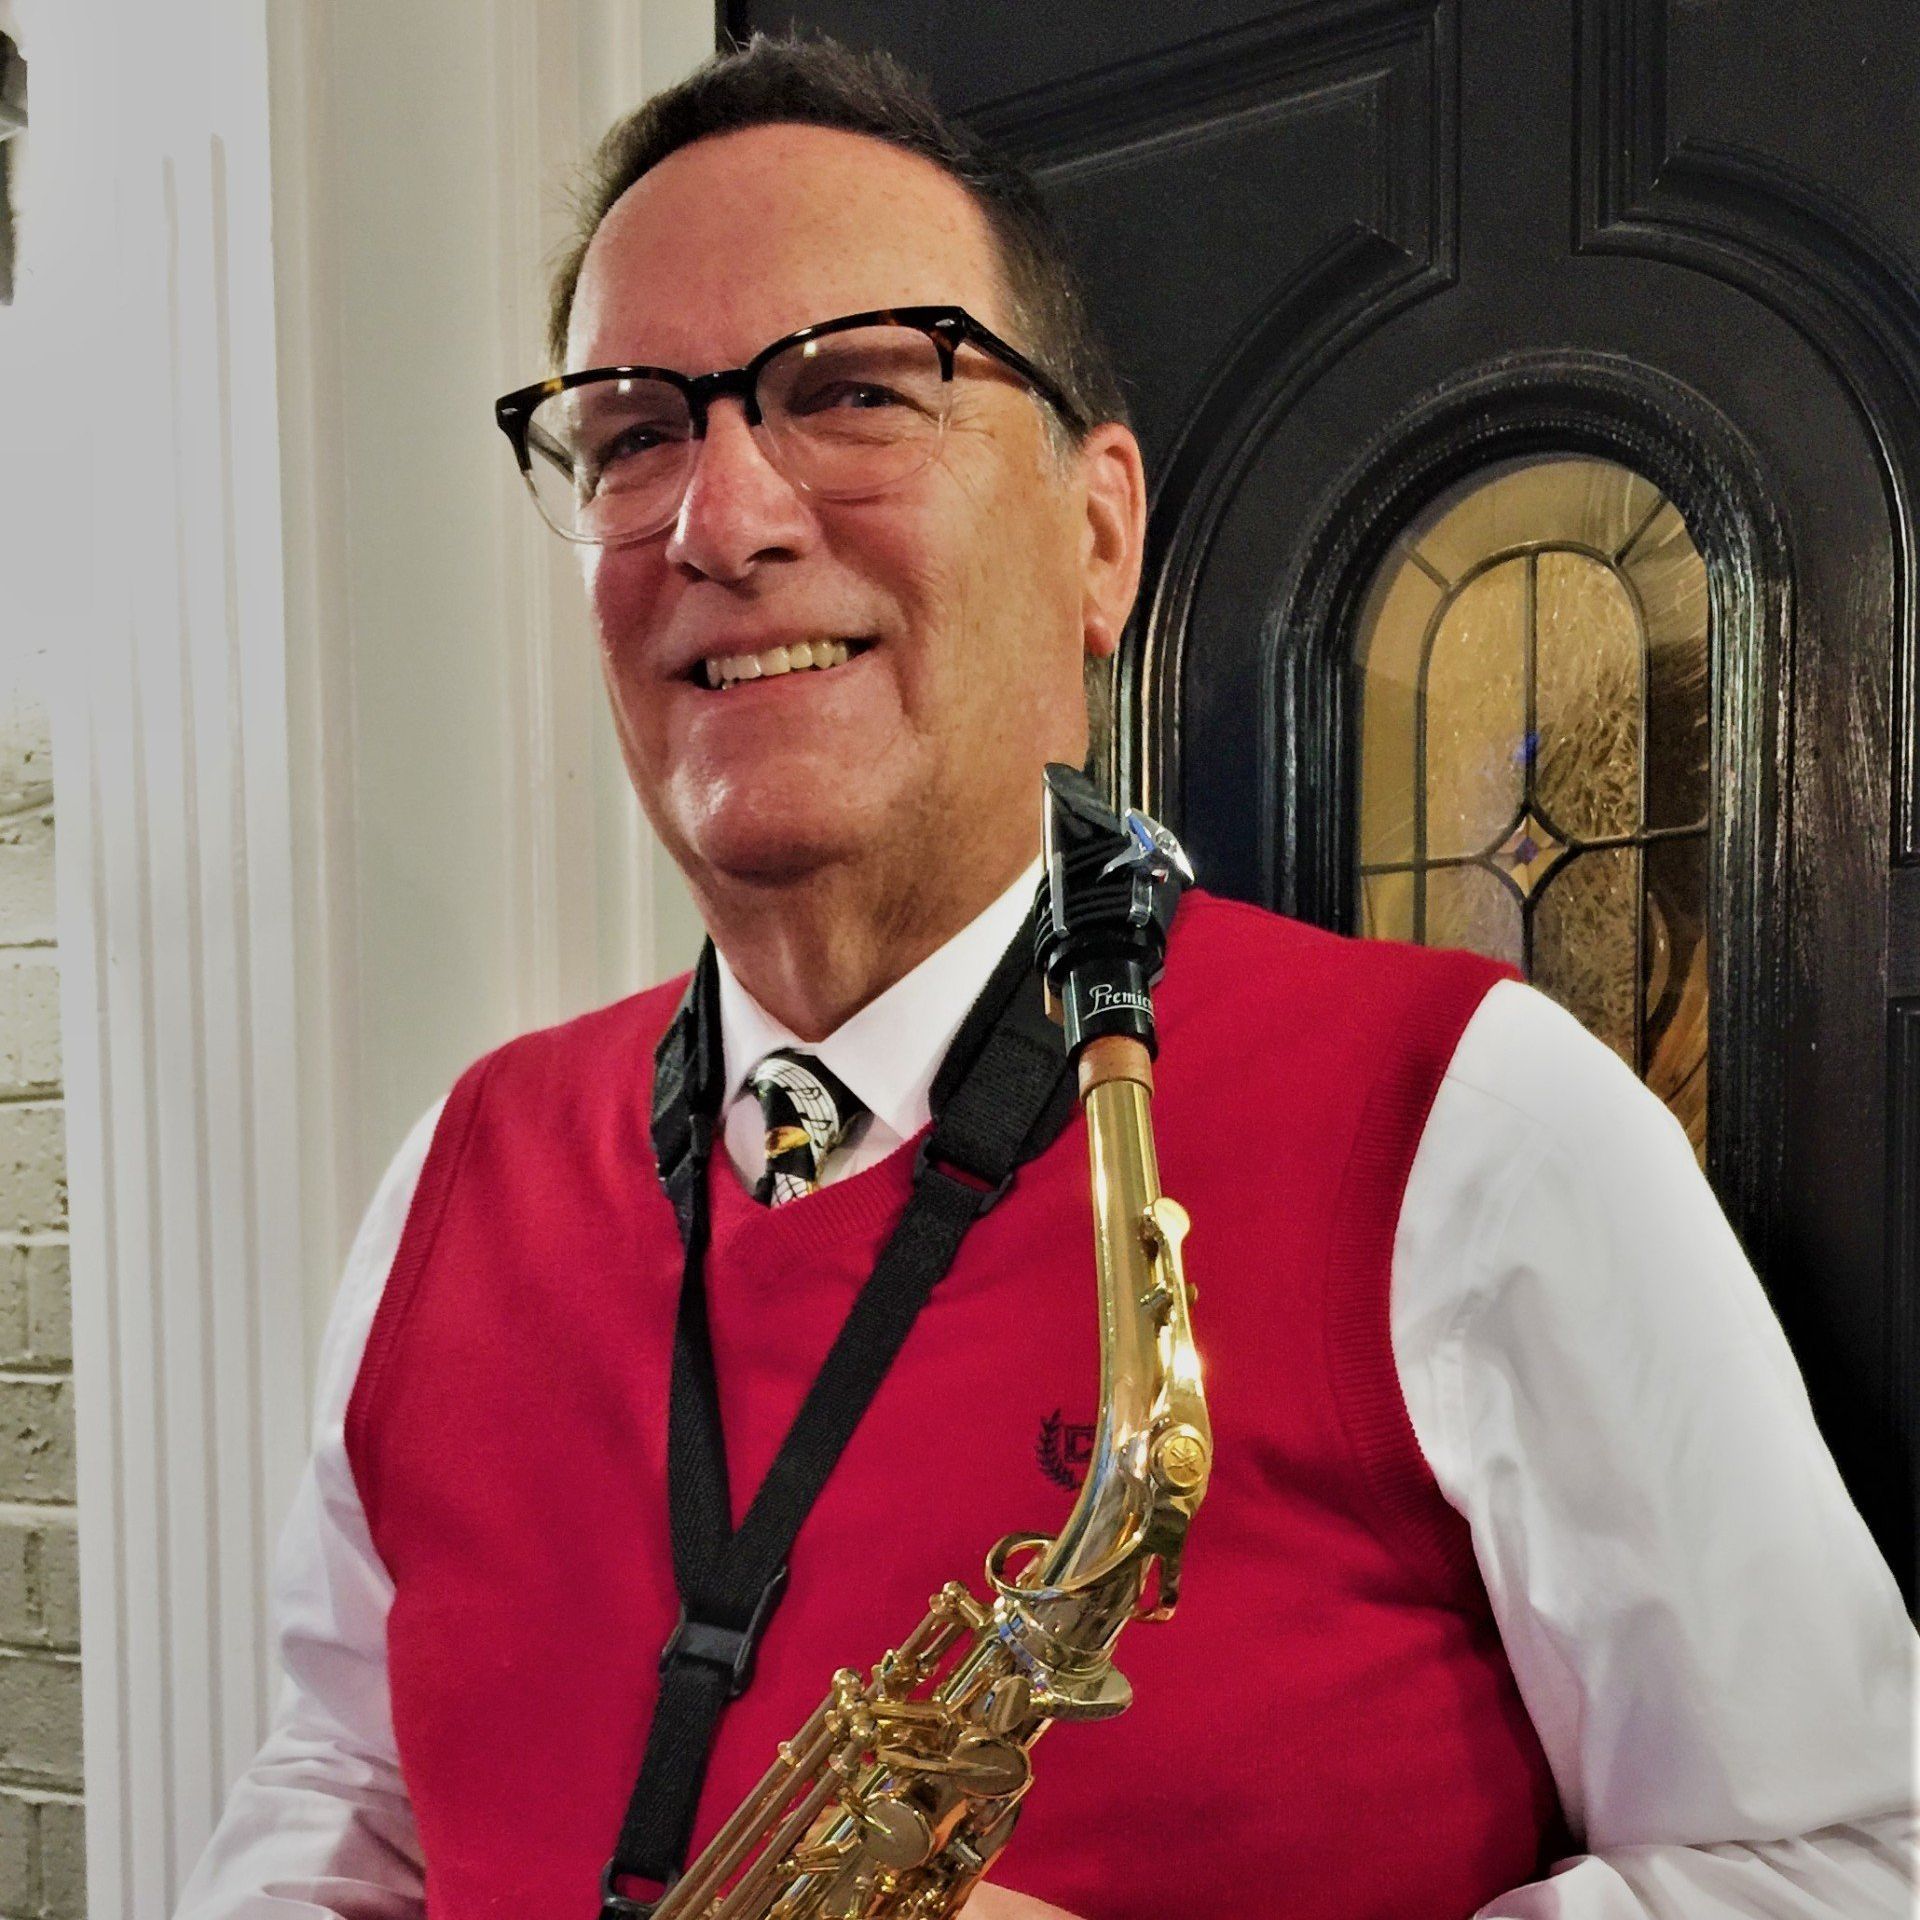 Philip Scott, saxophone and clarinet Instructor - Cary, NC